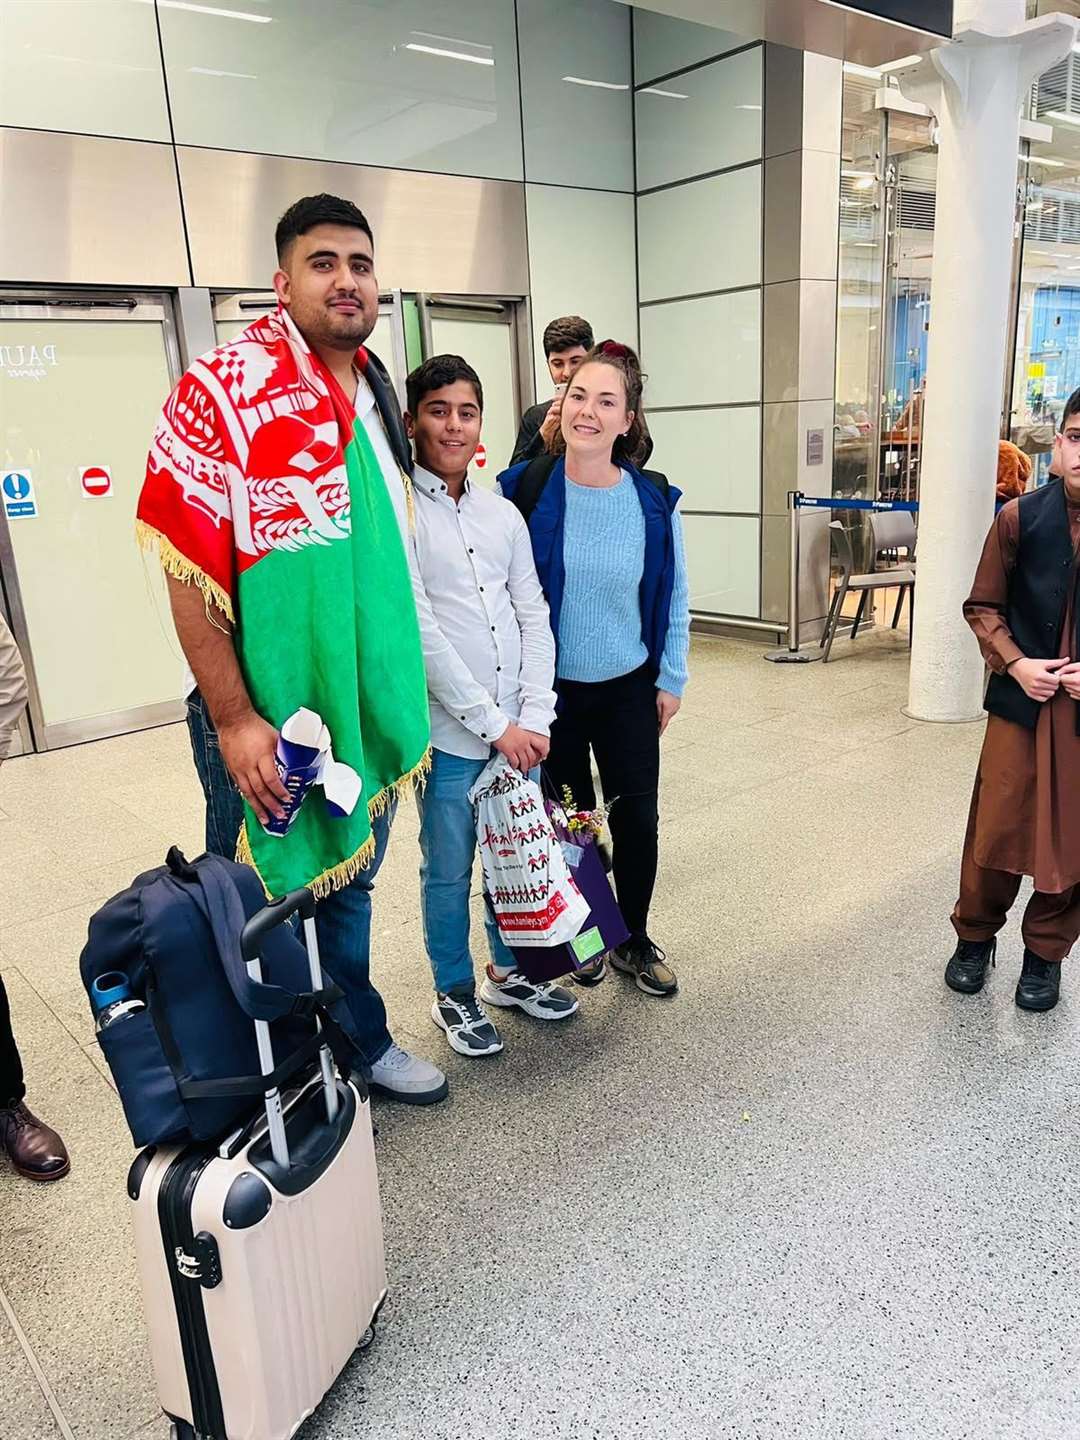 Obaidullah and his cousin Qamar, who fought to get his visa approved to look after him in the UK (PA)